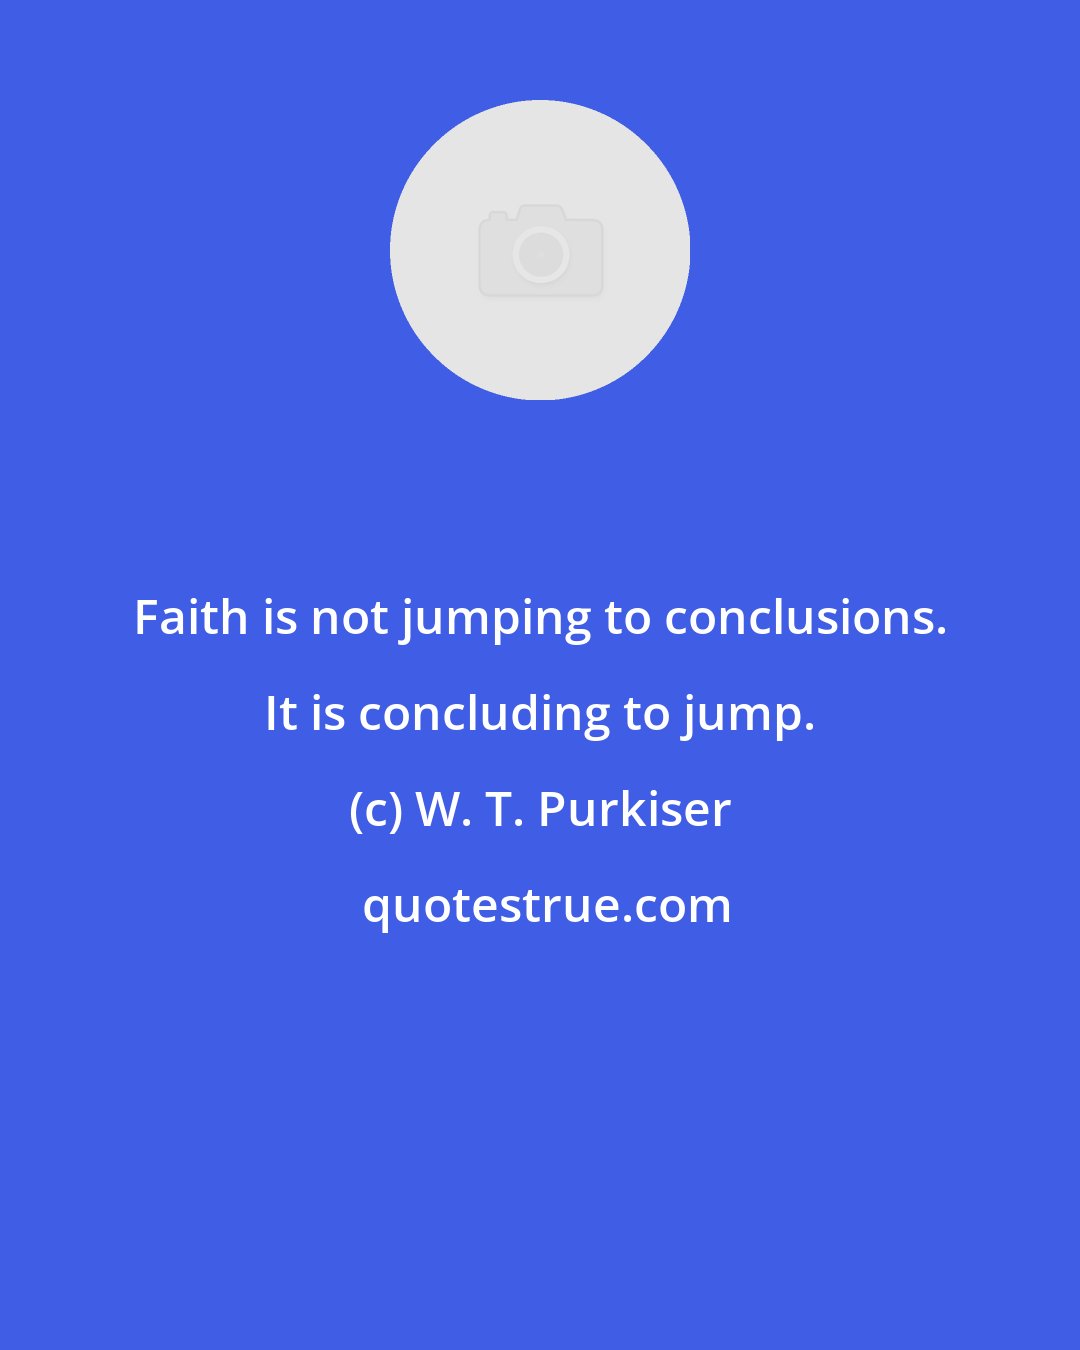 W. T. Purkiser: Faith is not jumping to conclusions. It is concluding to jump.